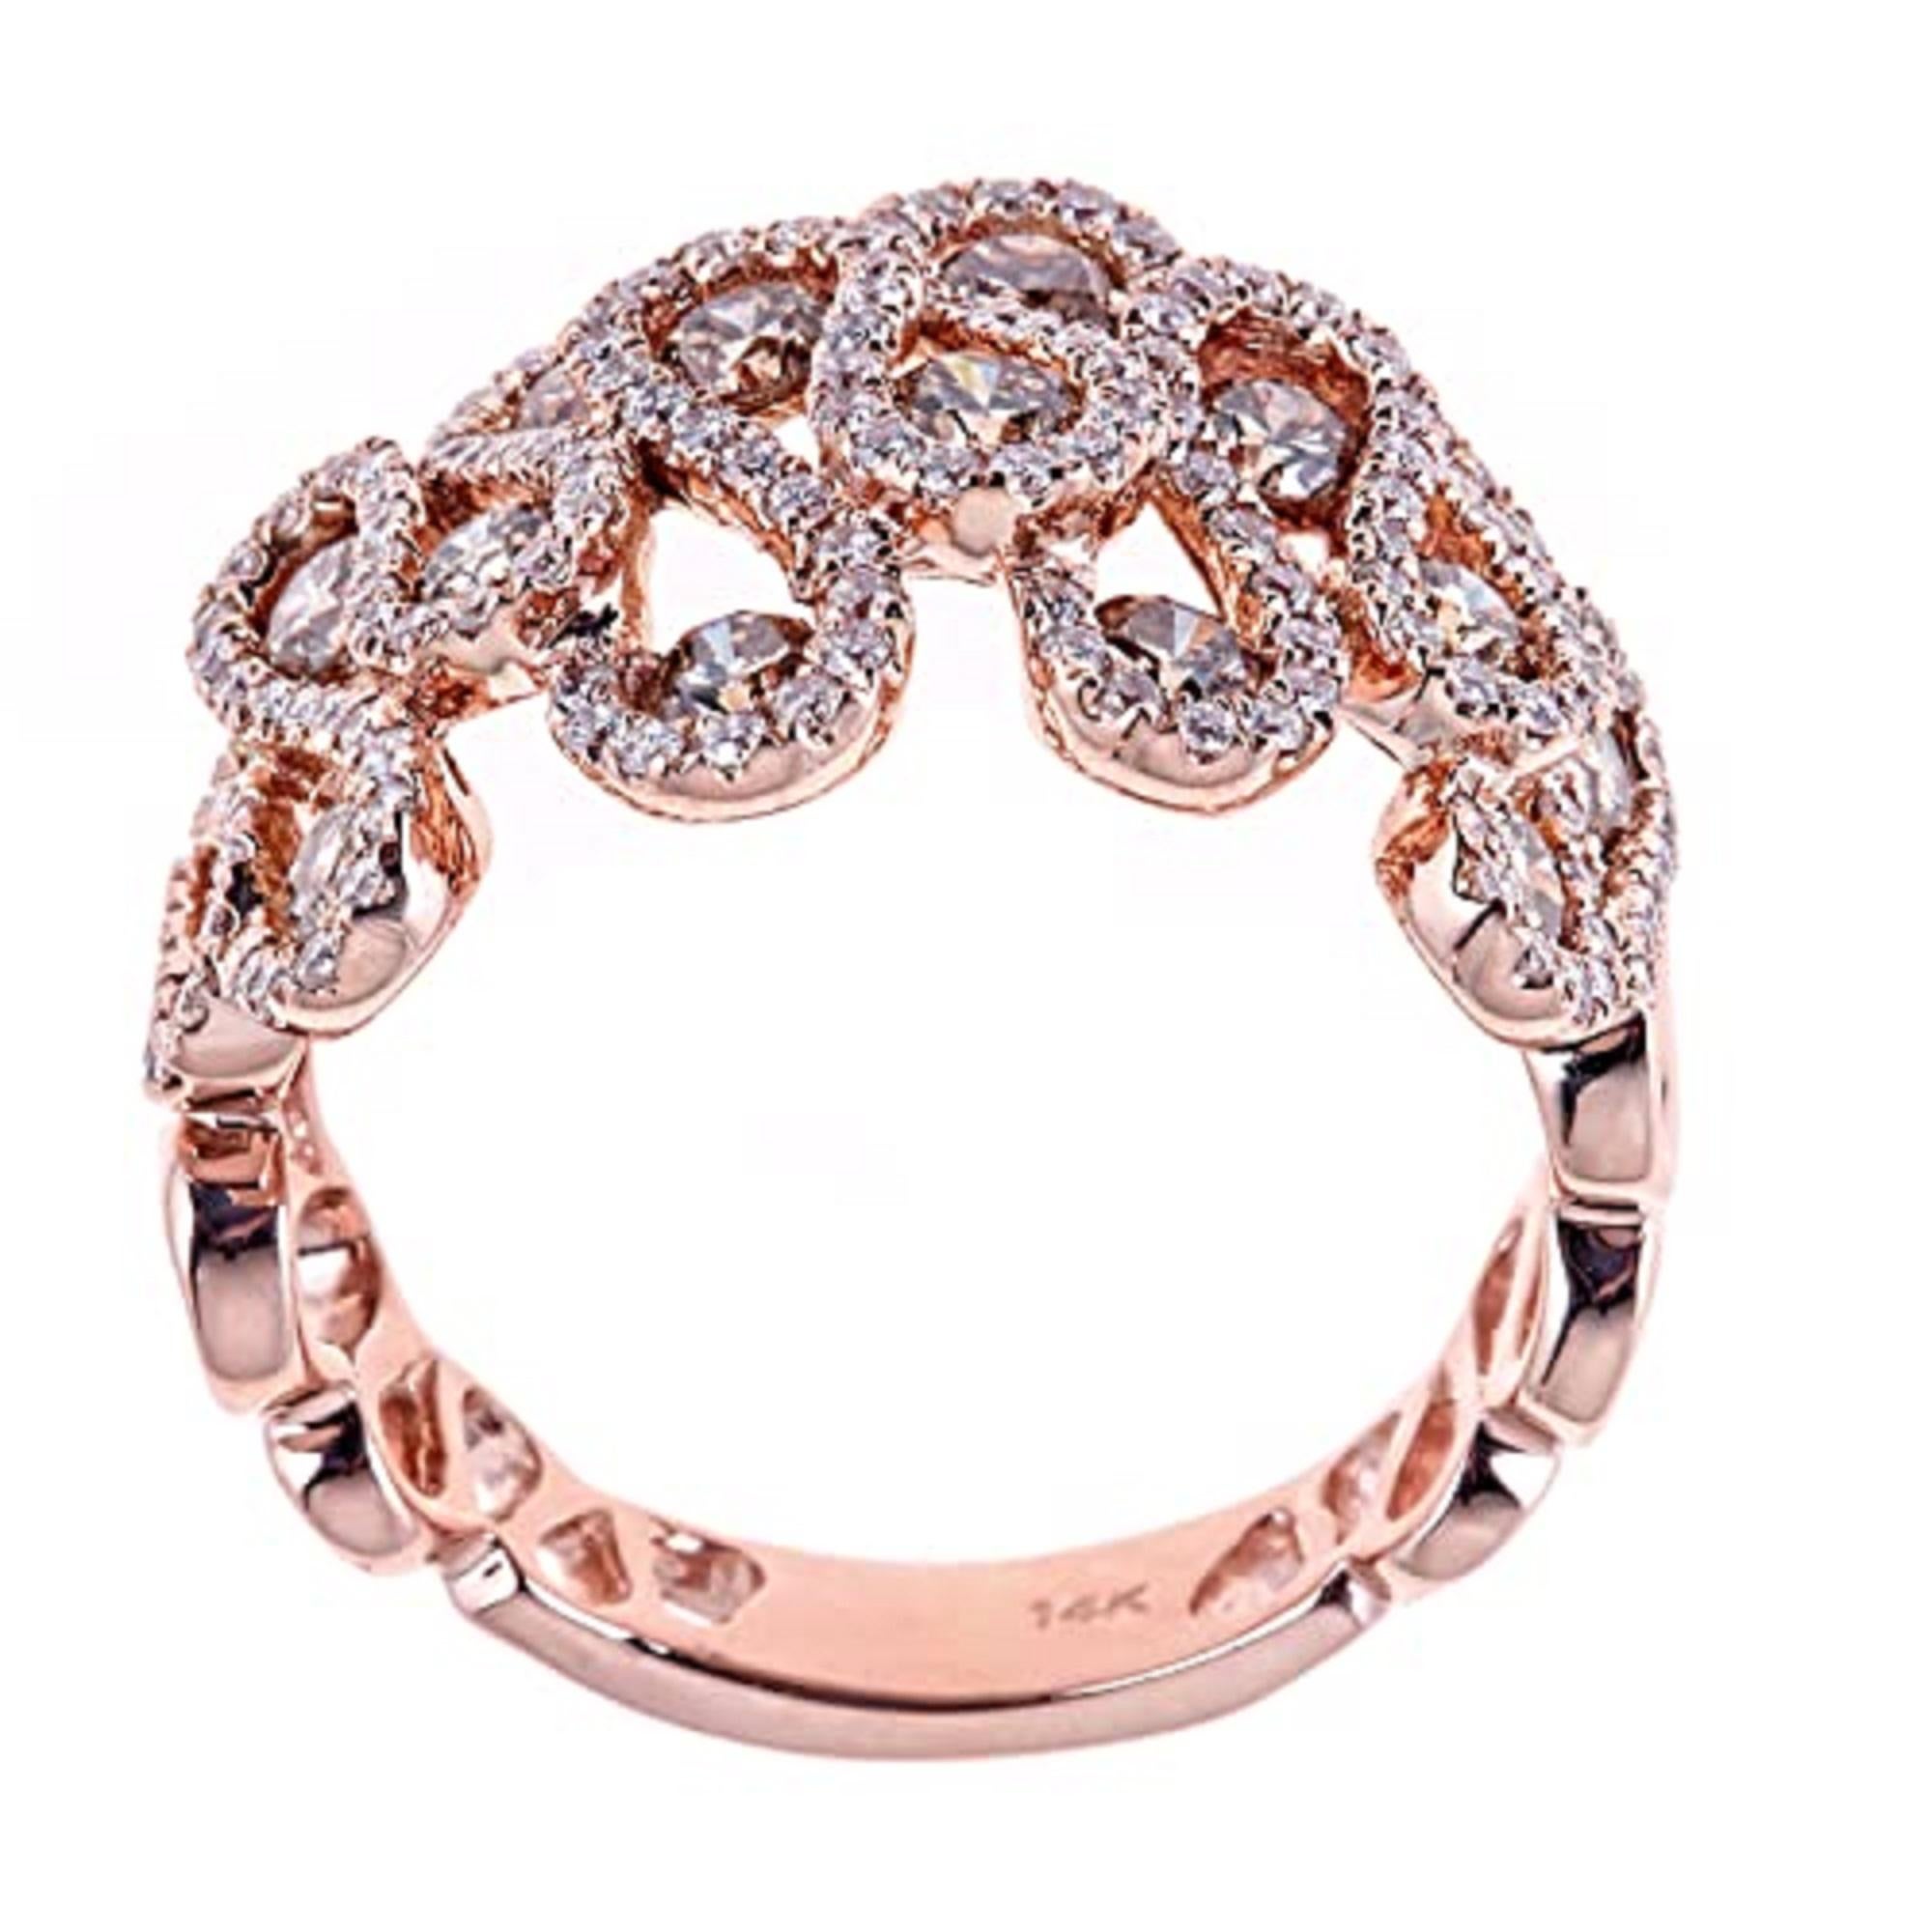 Decorate yourself in elegance with this Ring is crafted from 14-karat Rose Gold by Gin & Grace. This Ring is made up of Round-cut Prong-Setting Brown Diamond (16 Pcs) 1.20 Carat and Round-cut Prong-Setting White Diamond (164 Pcs) 0.60 Carat . This